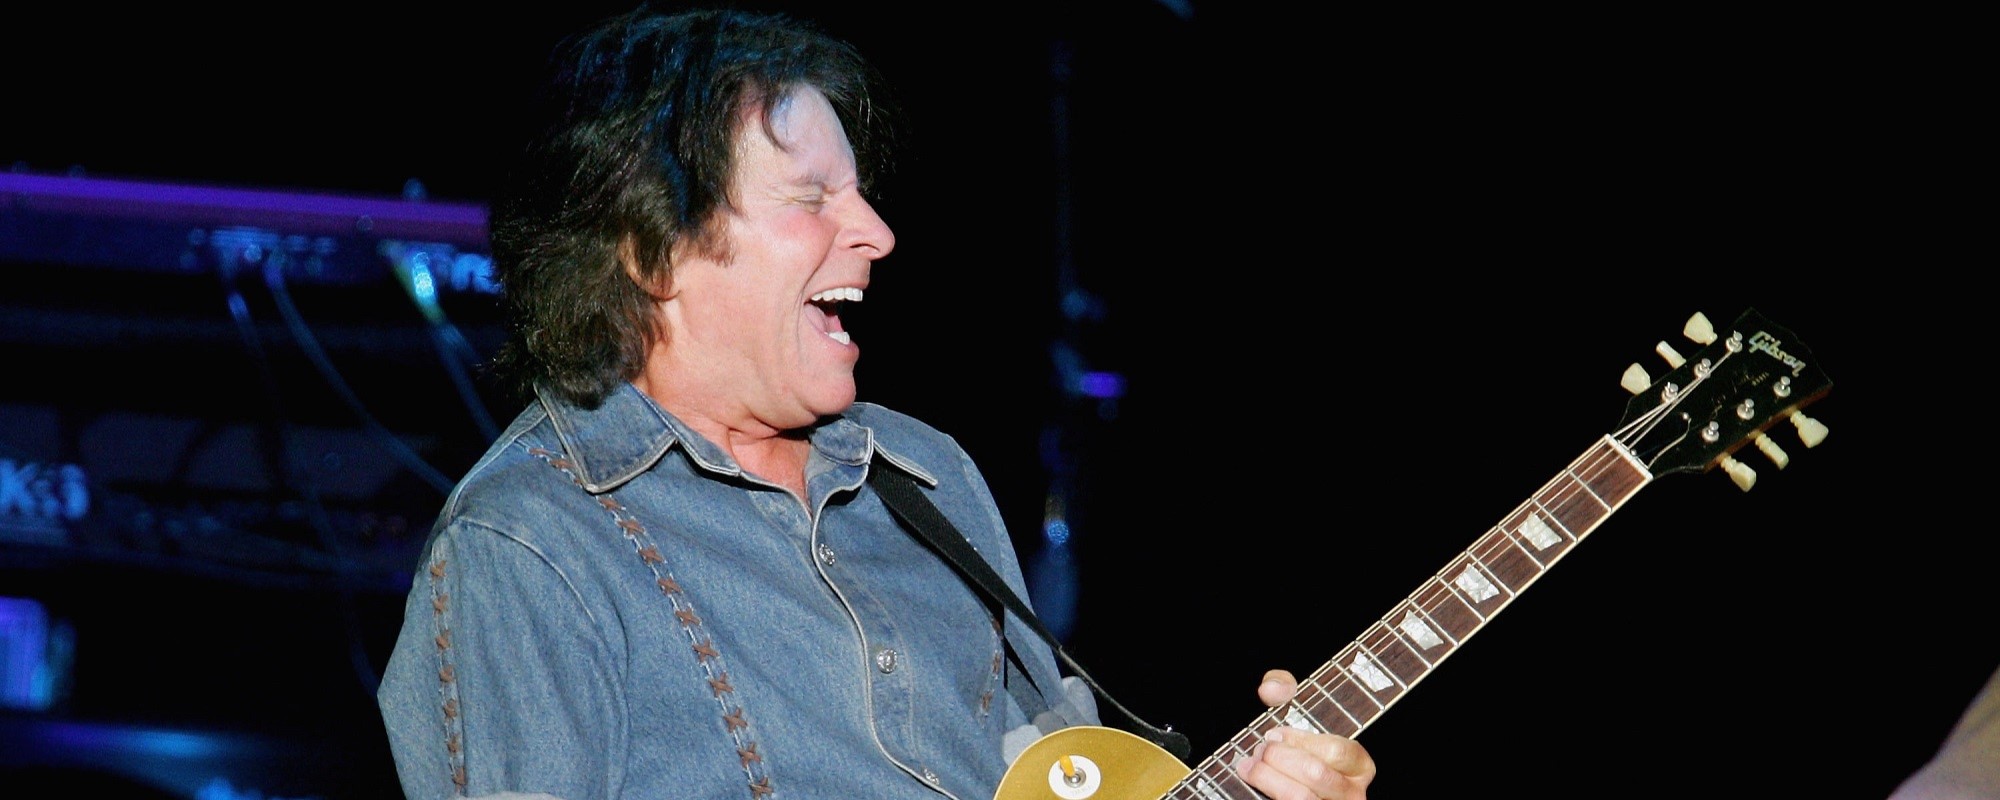 5 Outstanding Covers of CCR Tunes and John Fogerty Solo Songs